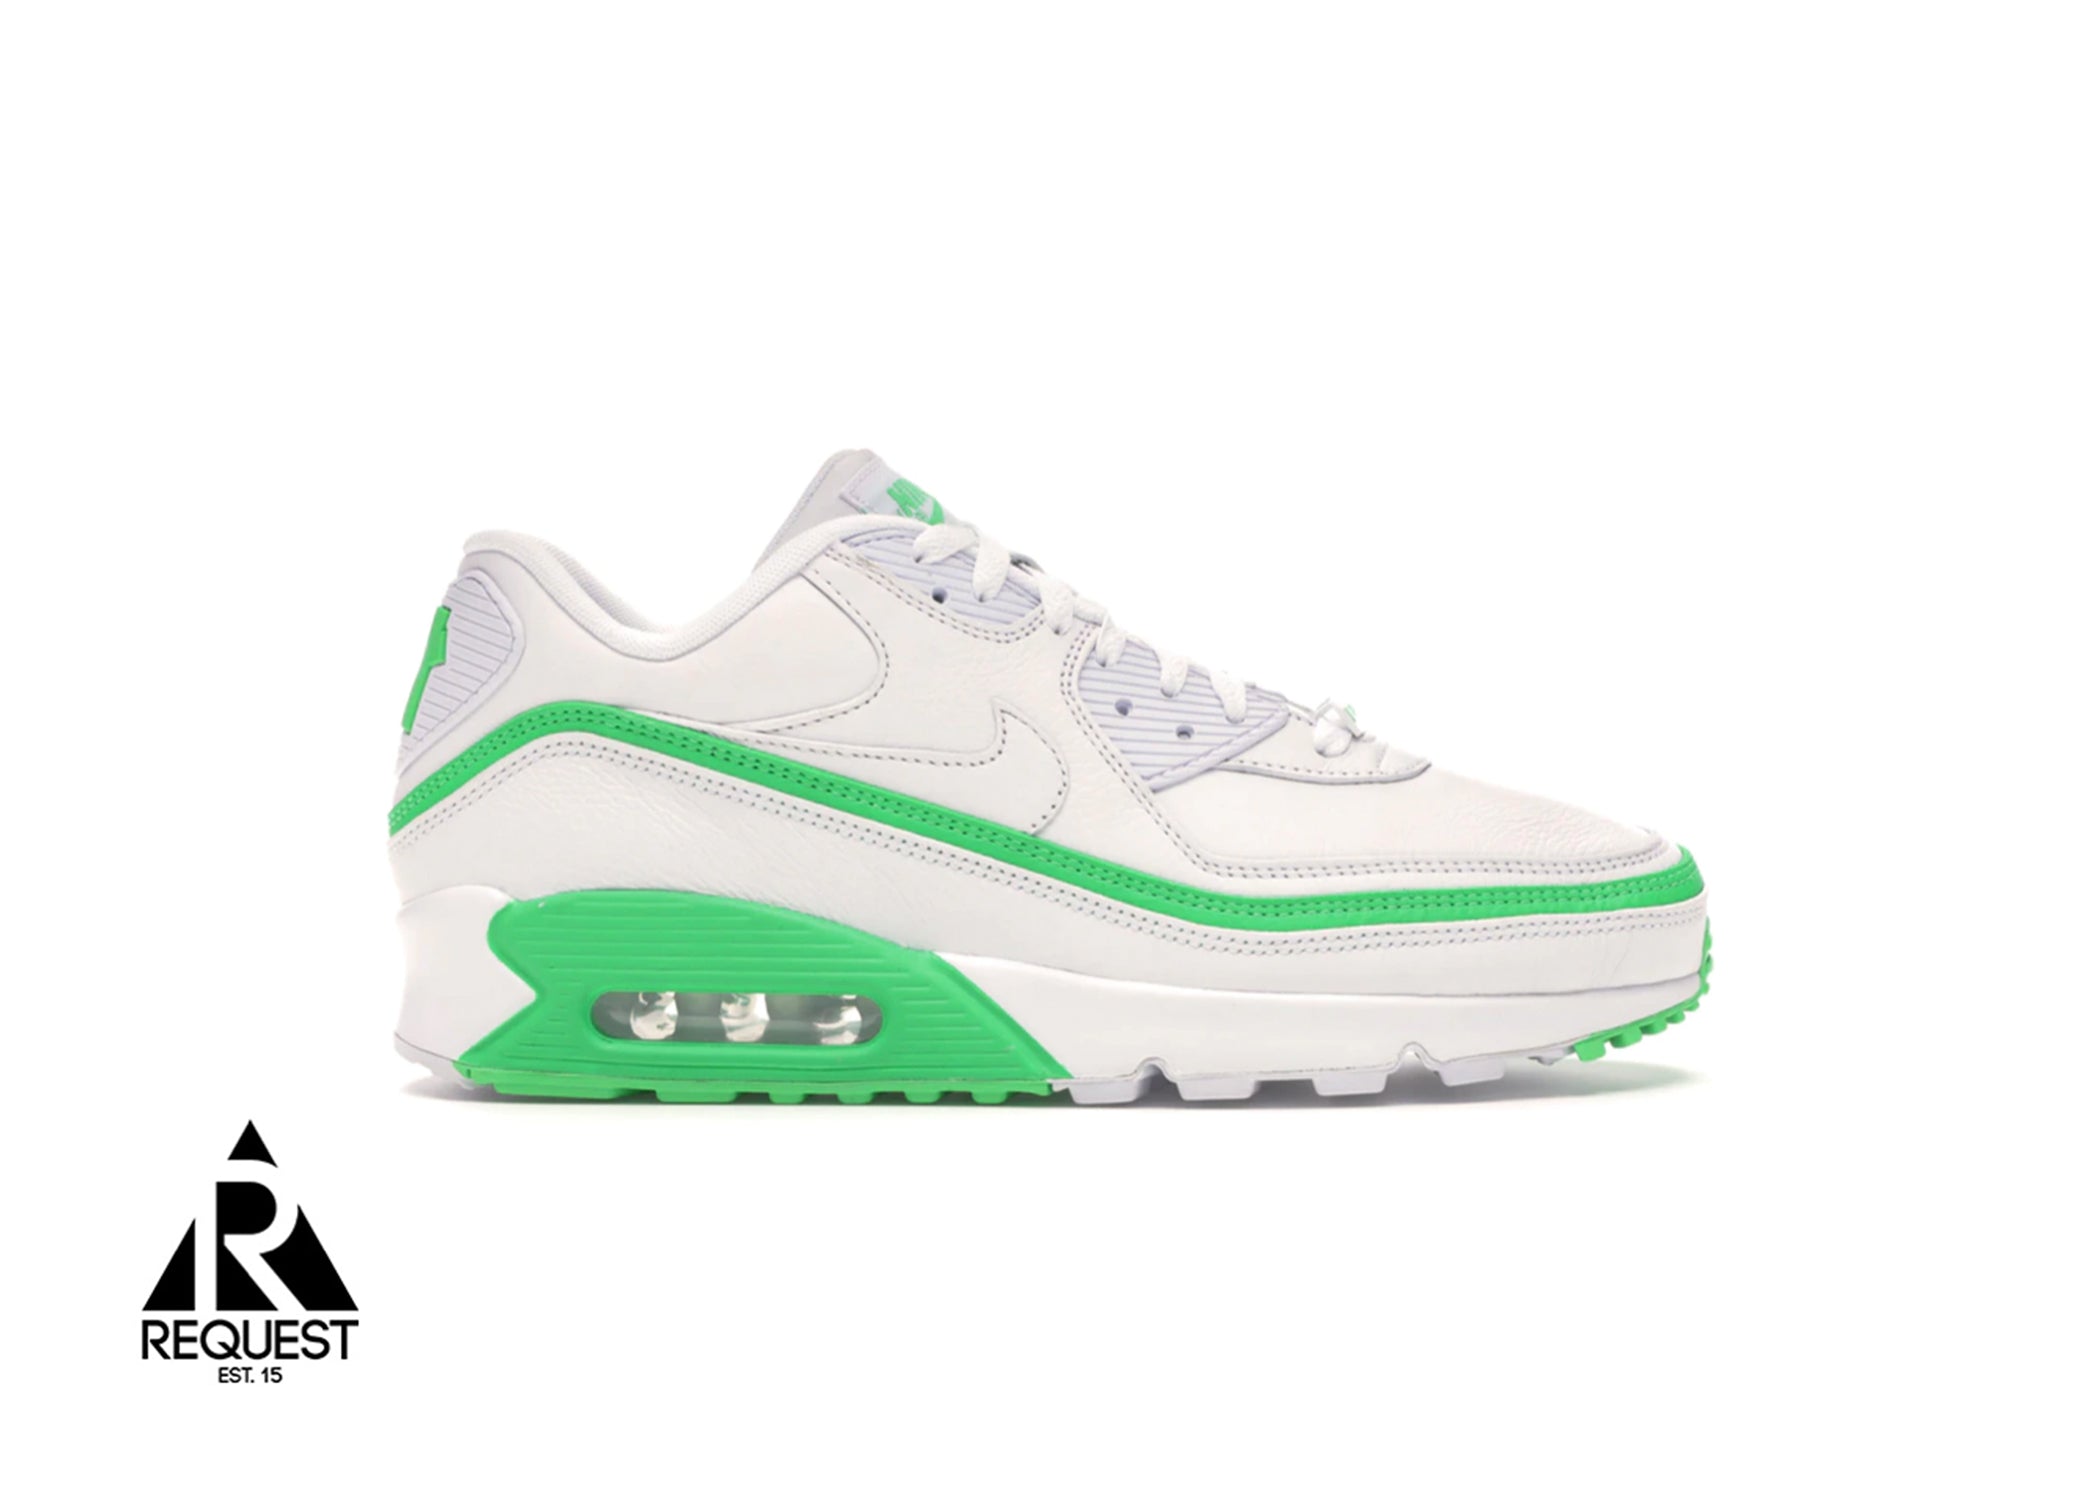 Nike Air Max 90 Undefeated “White Green”